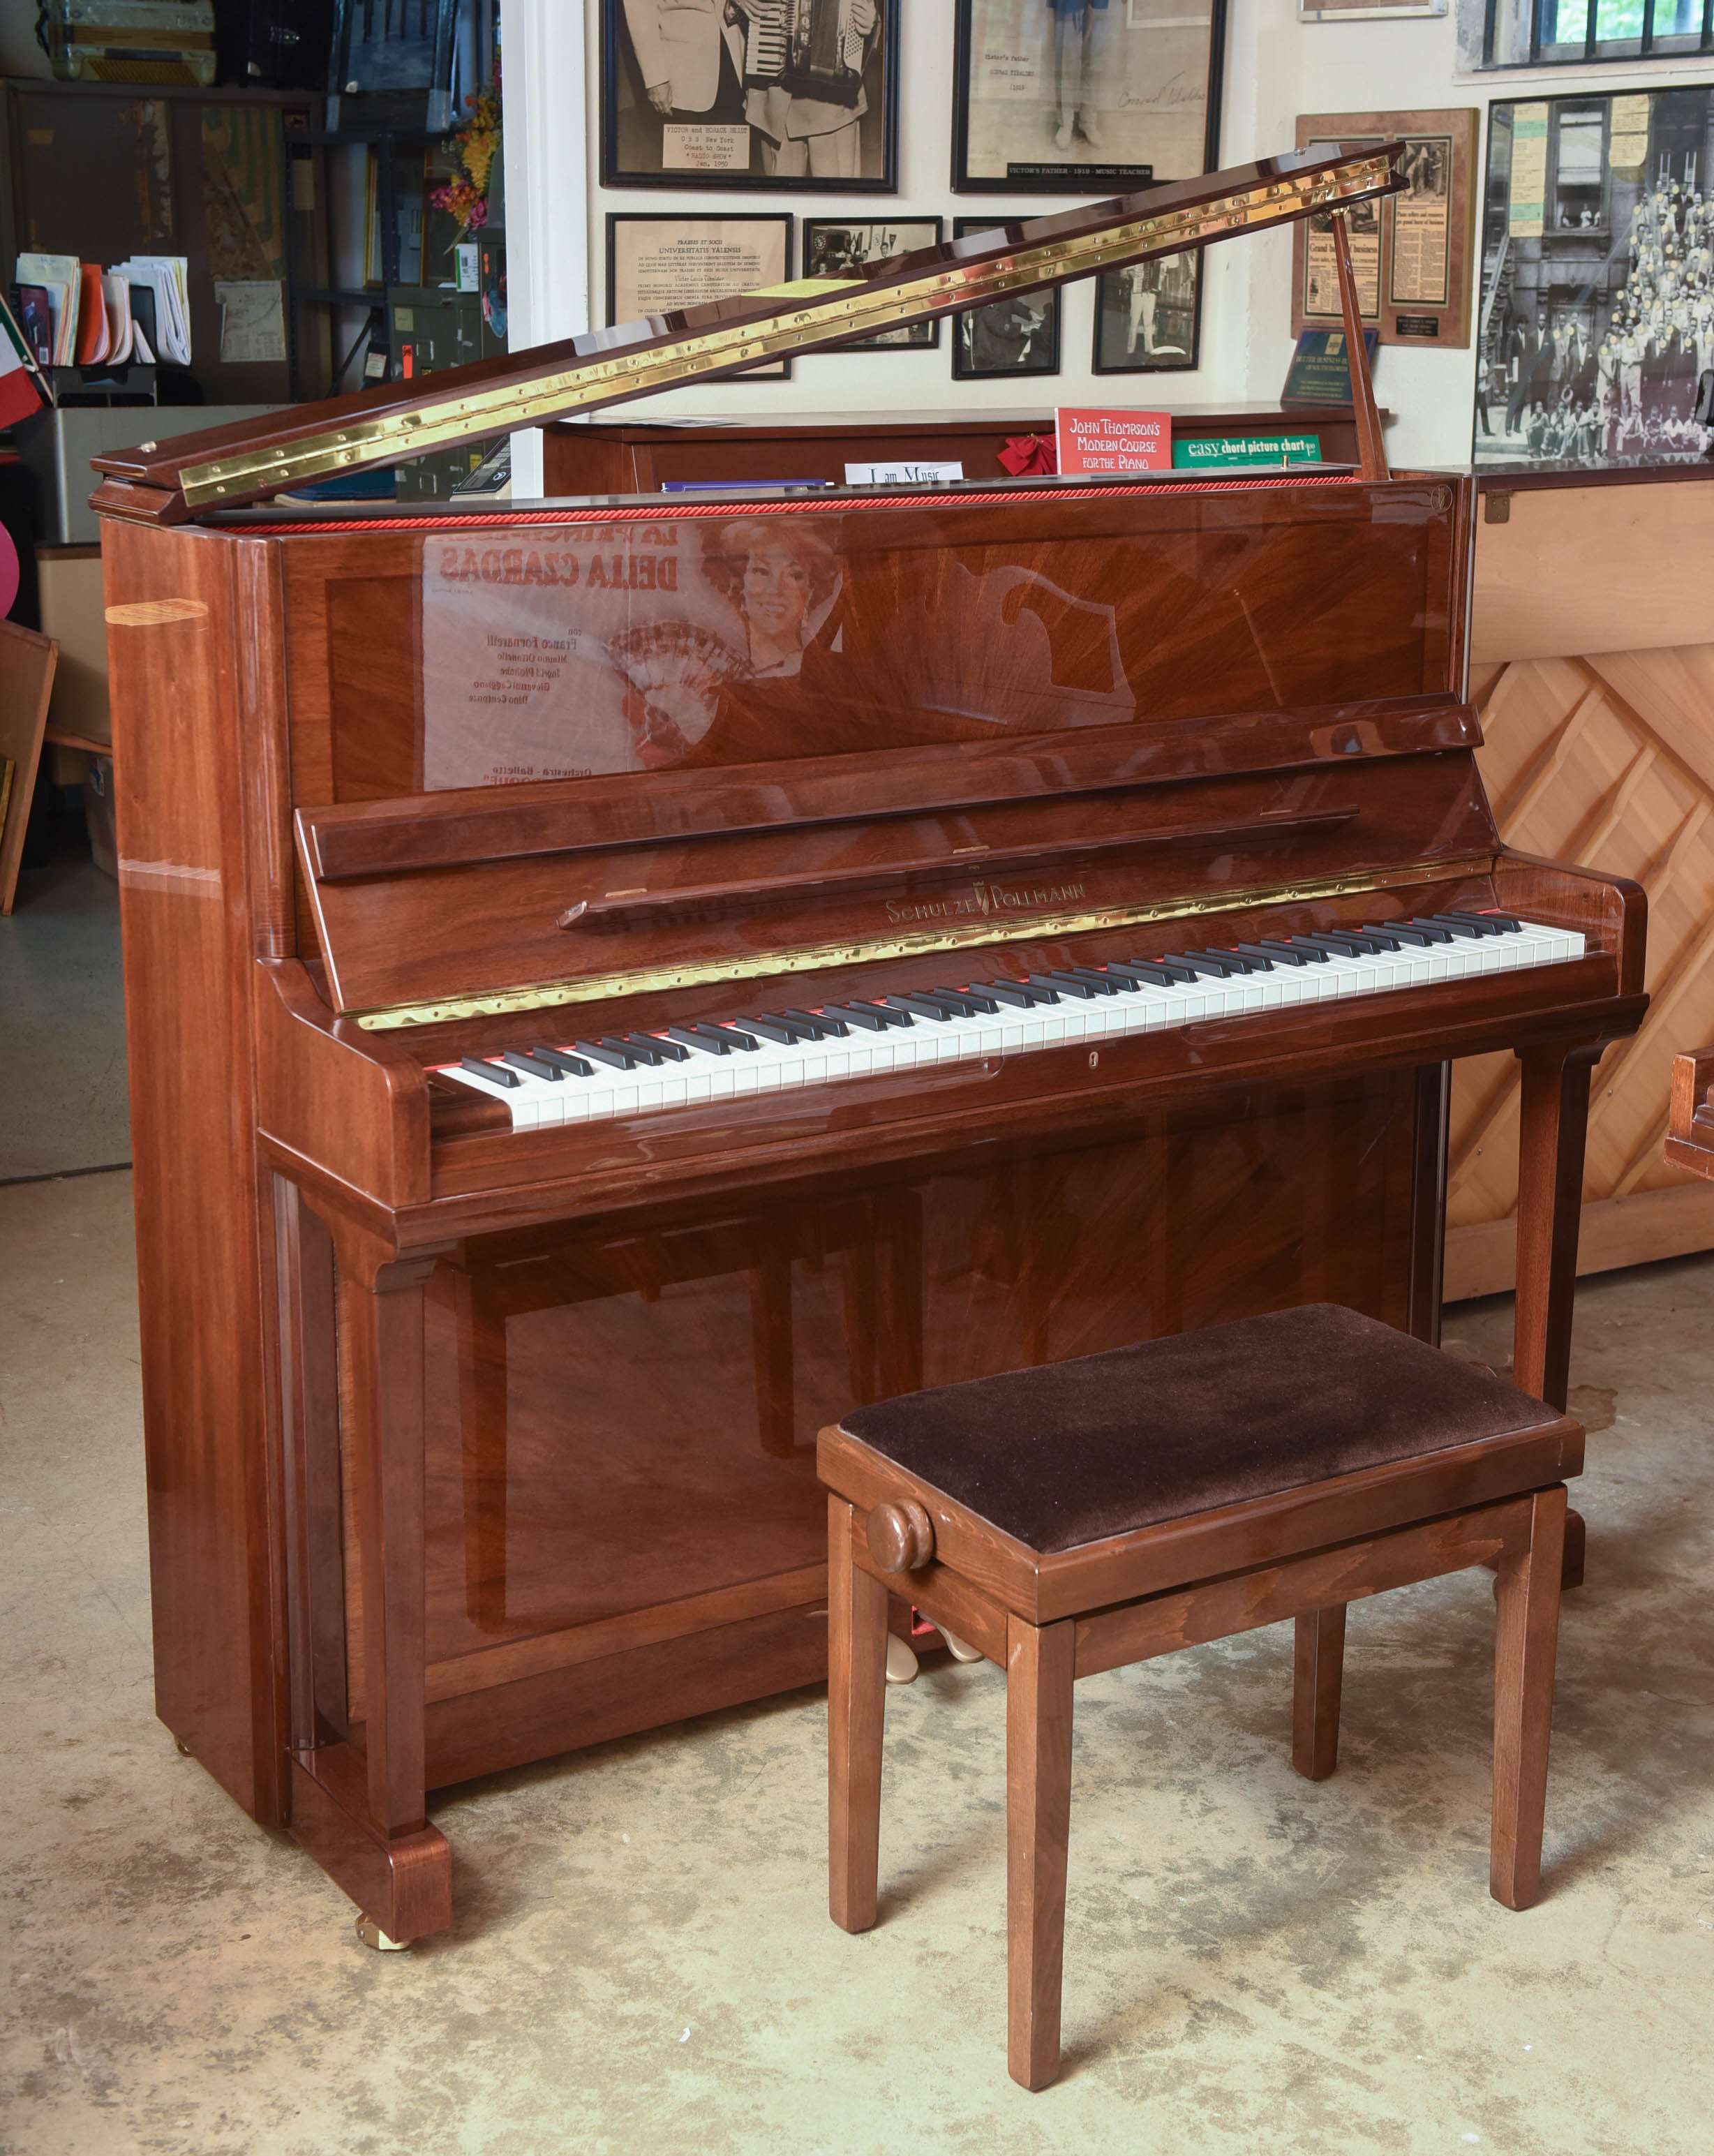 Schulze Pollman Piano with a Baby Grand Style Top